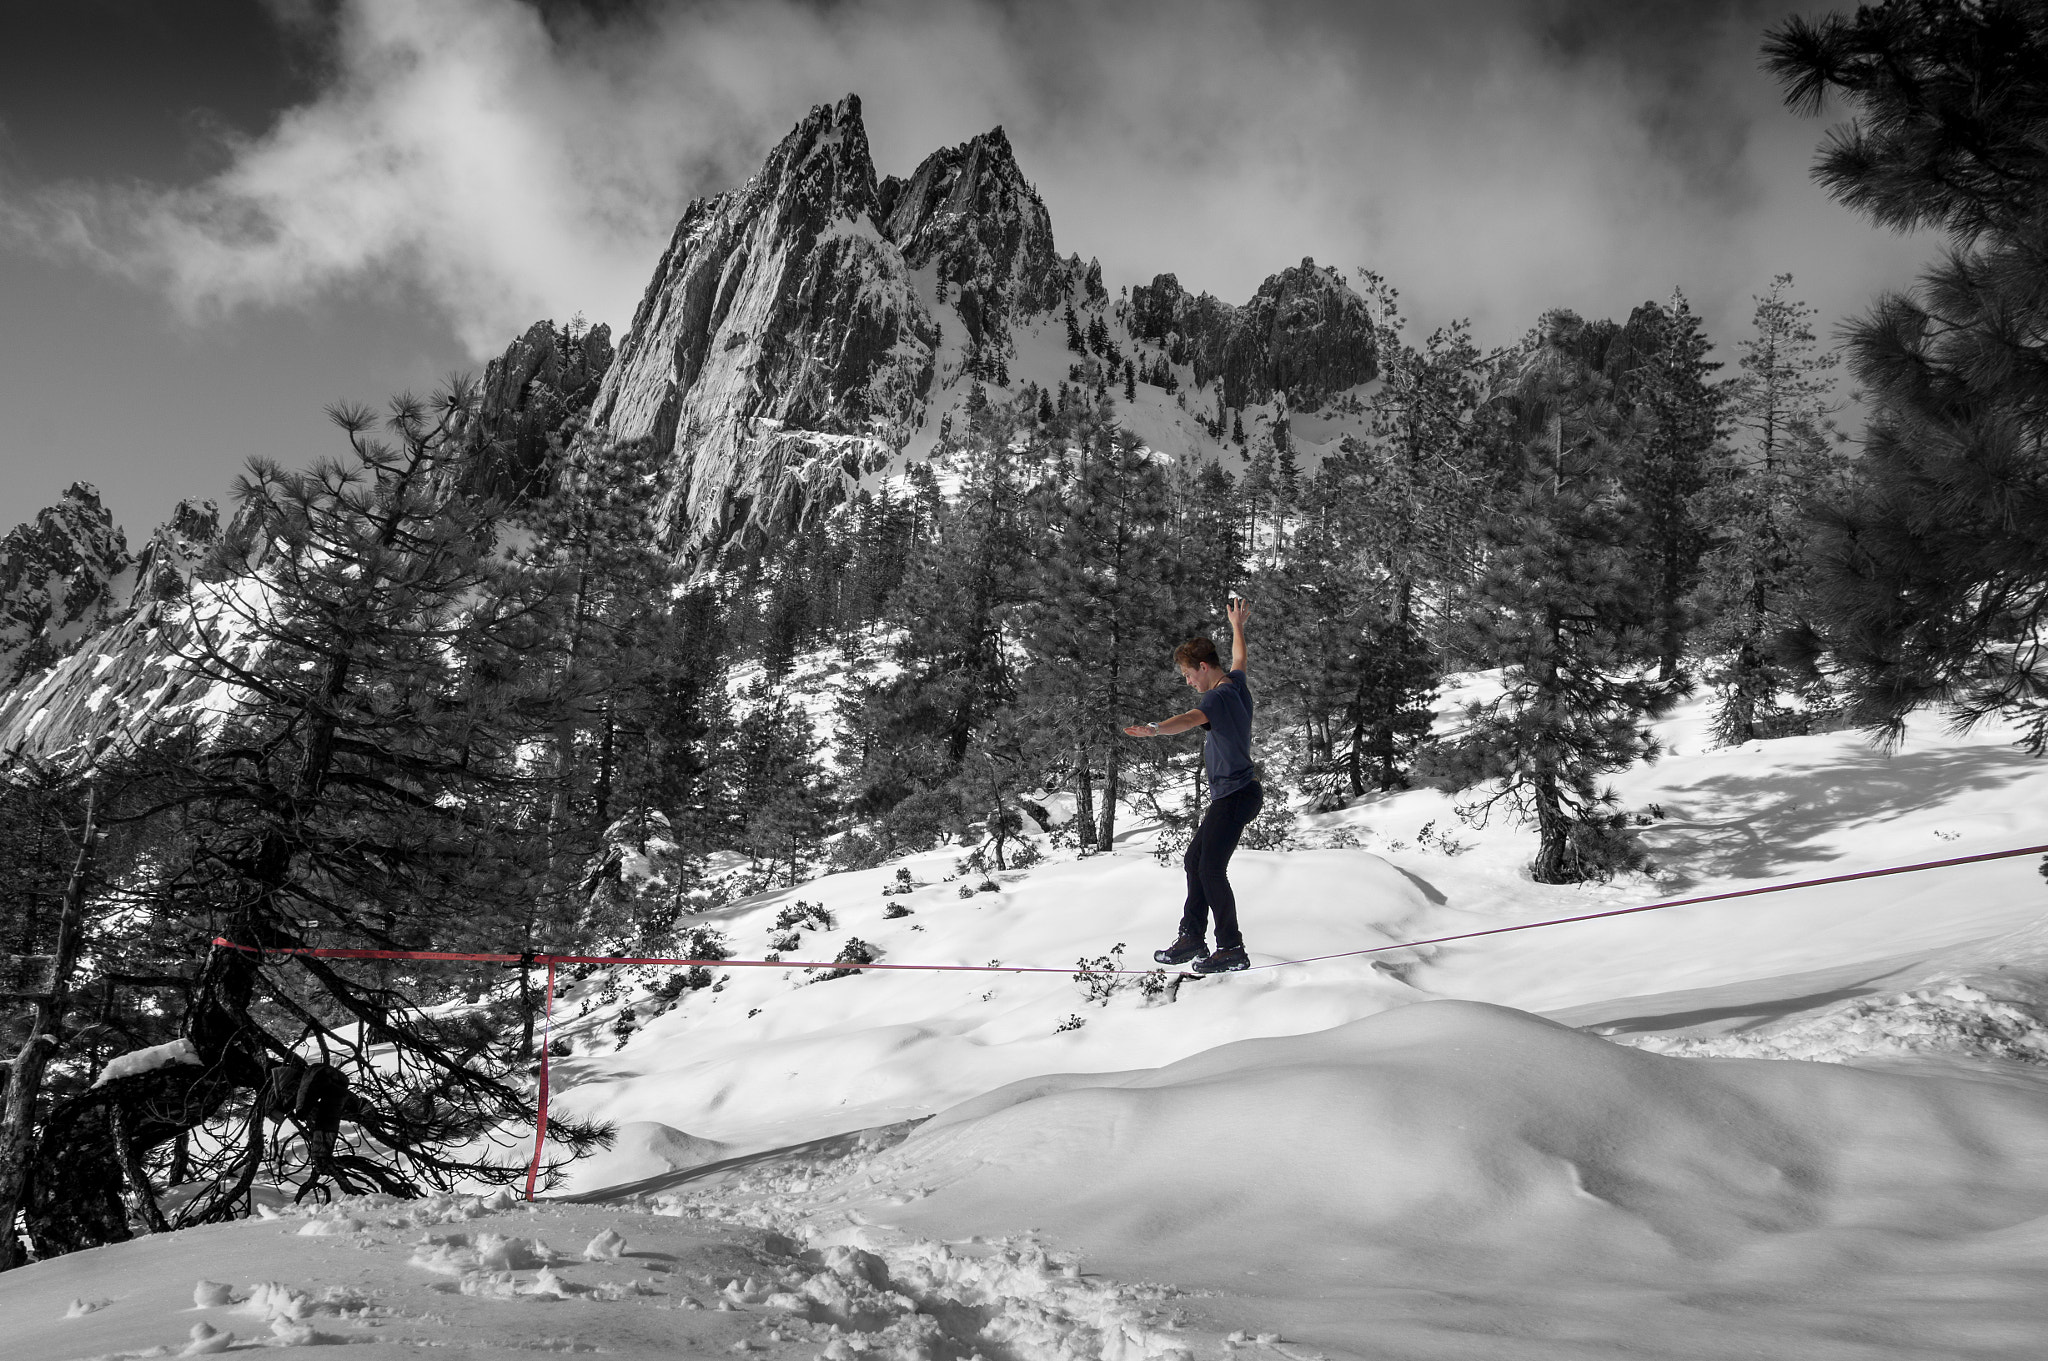 Sony Alpha DSLR-A580 + Tamron 18-270mm F3.5-6.3 Di II PZD sample photo. Castle crags slacklining photography